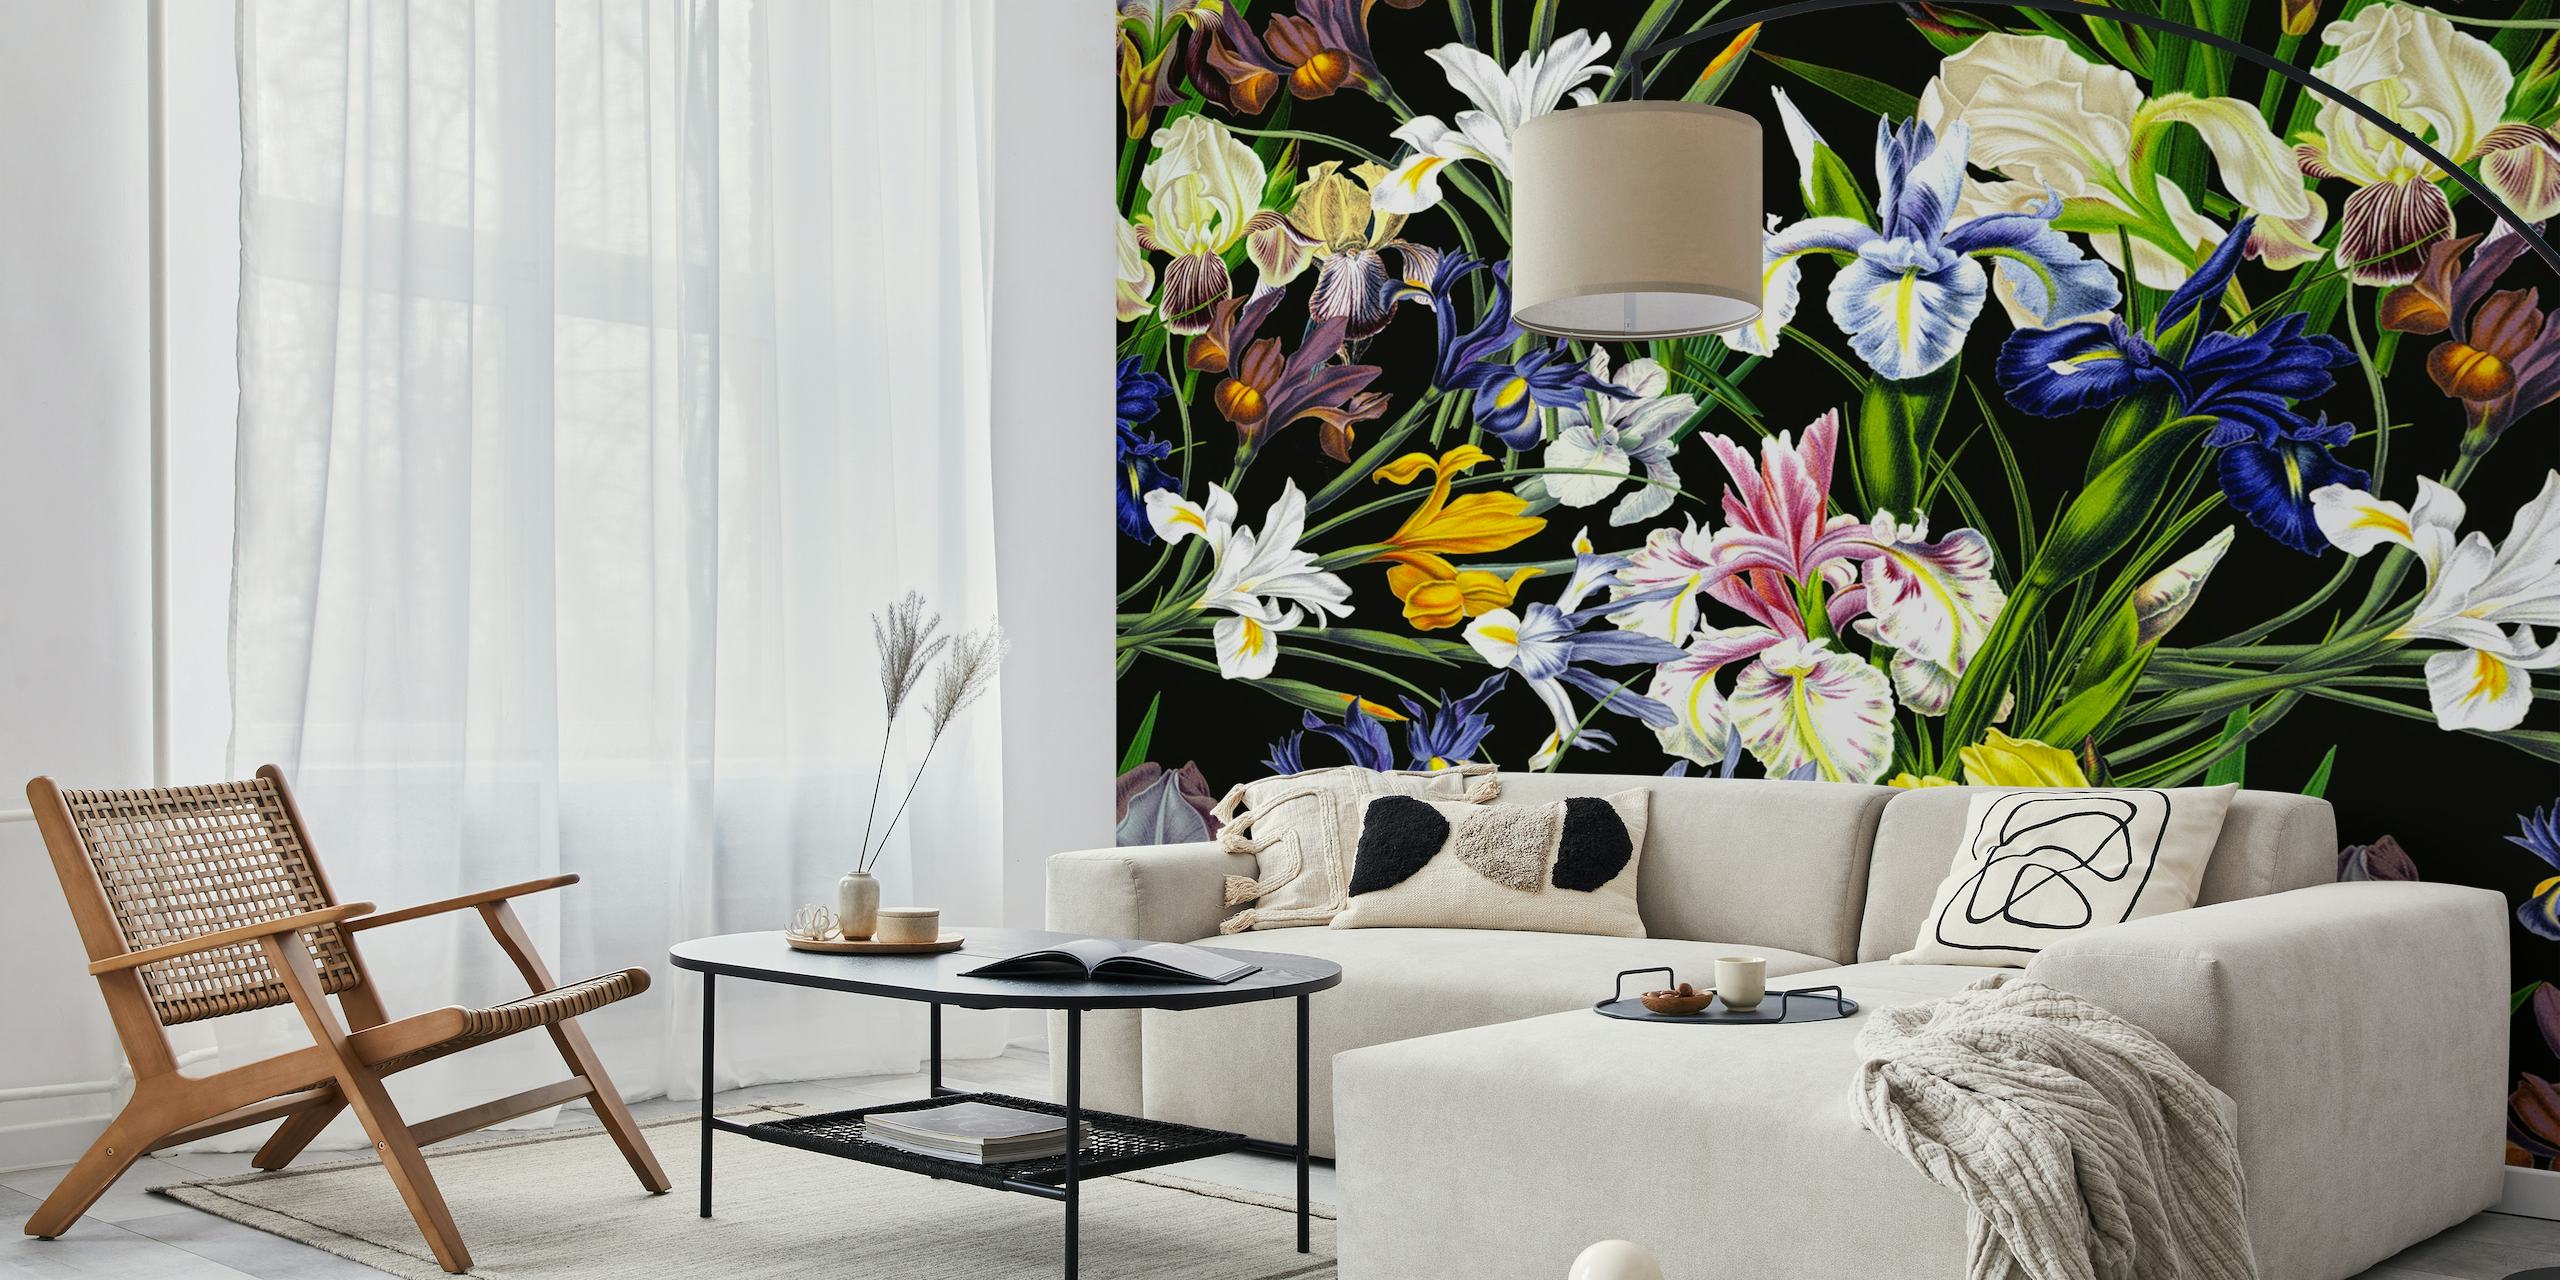 Vintage-style wall mural featuring a dense pattern of colorful irises on a dark background, evoking an opulent Baroque atmosphere.